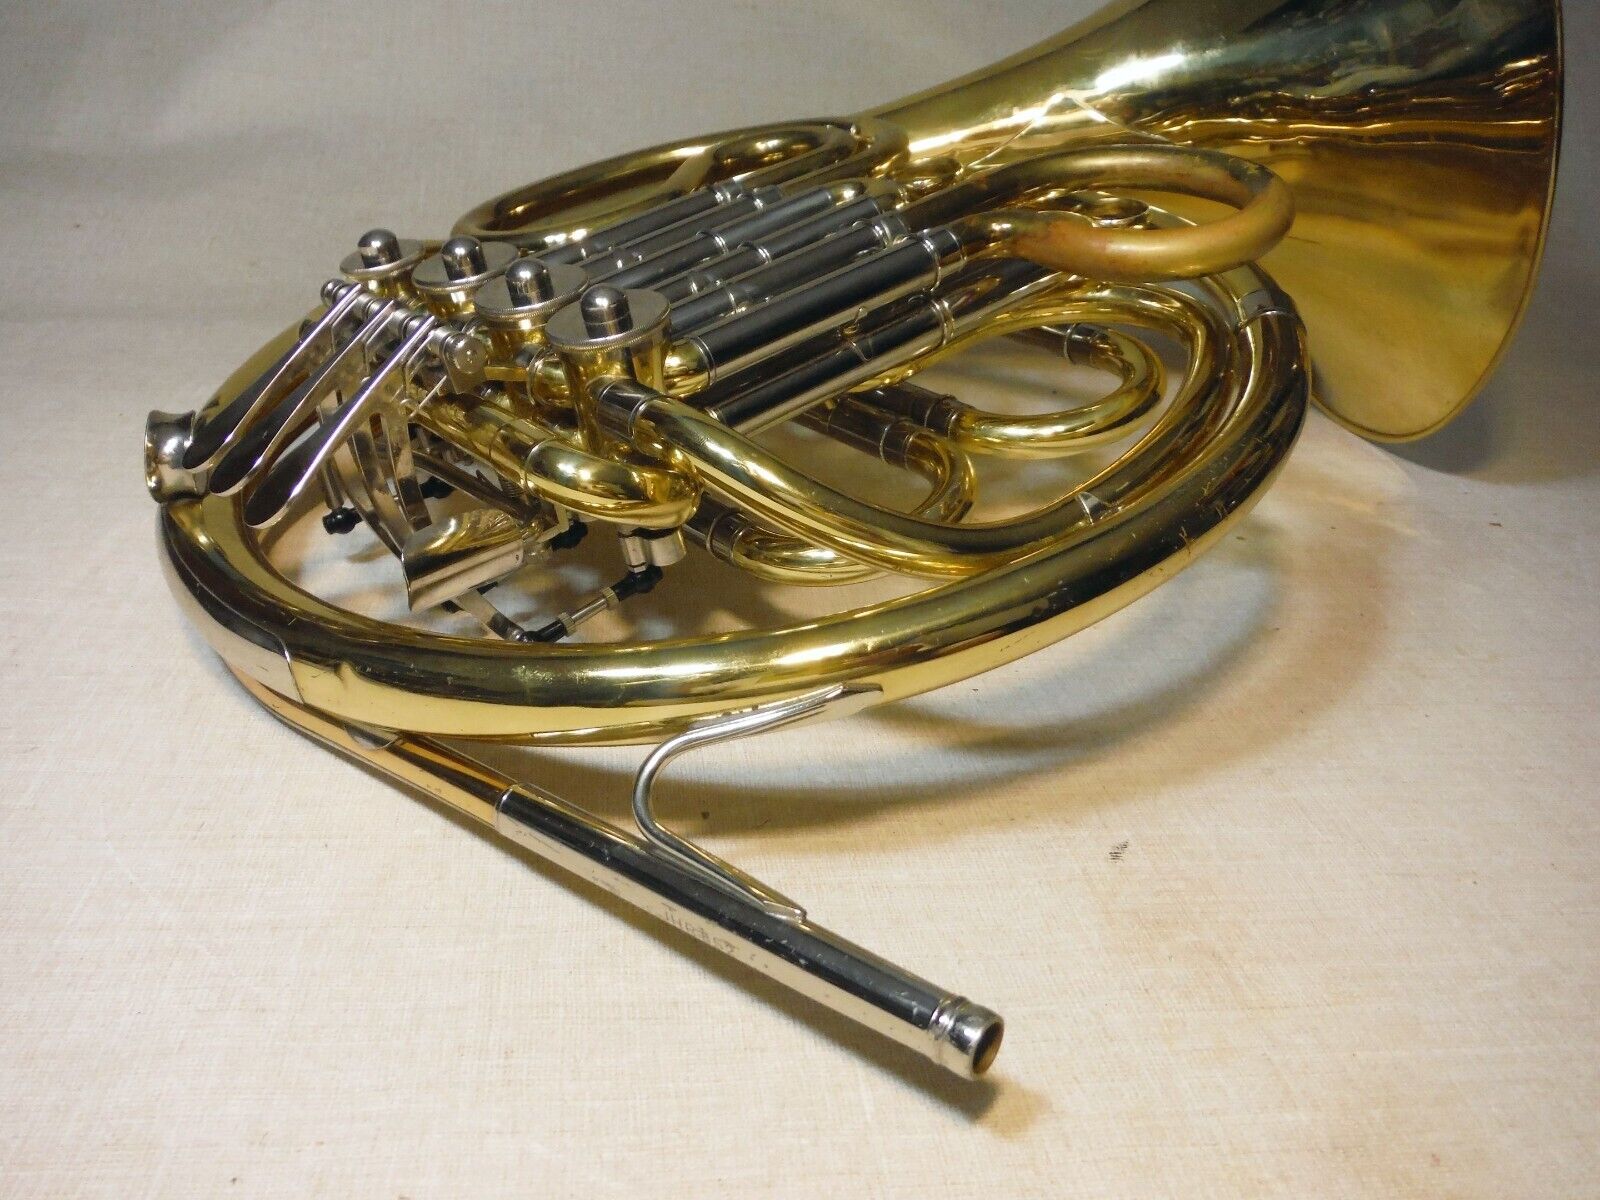 JUPITER JHR-852 DOUBLE FRENCH HORN BRASS WORKING GOOD W/DENTS CASE MOUTHPIECE 11